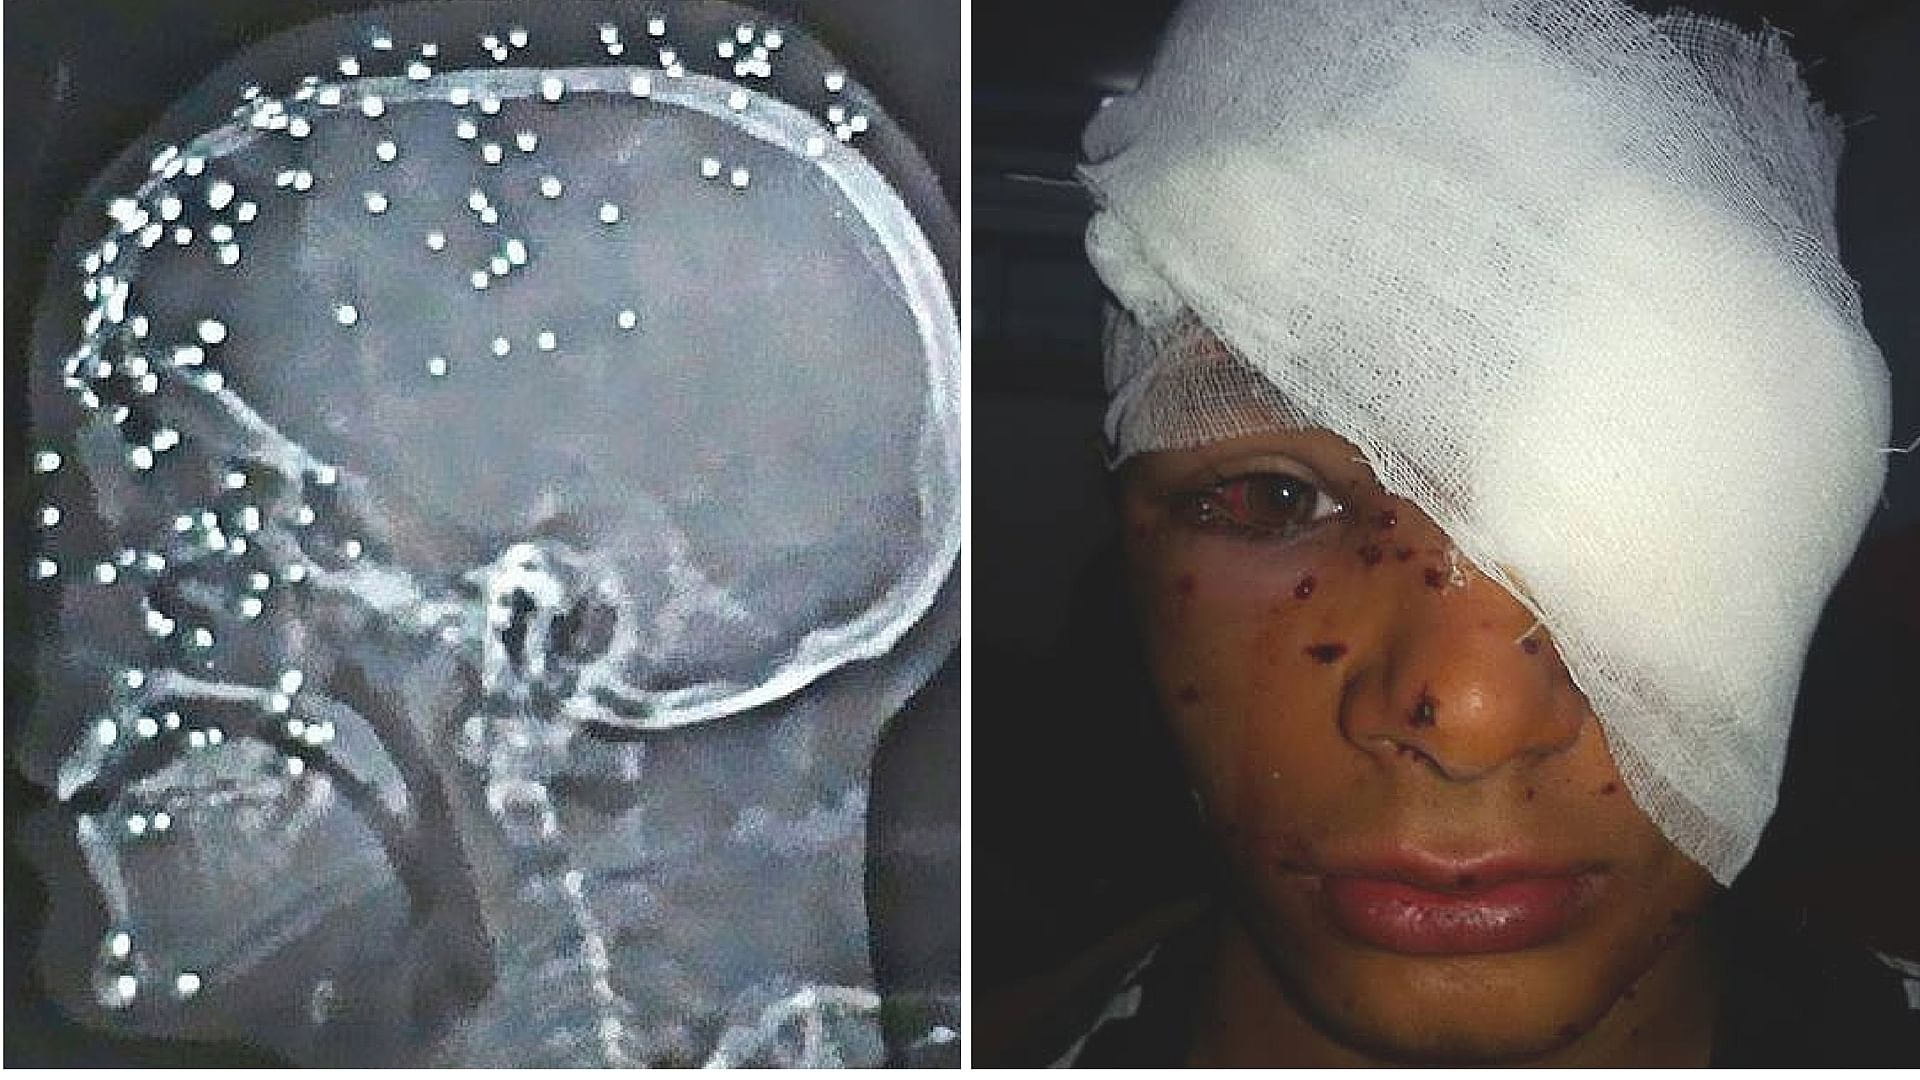 An X-ray showing pellet injuries to a skull (L). A class 10 student who was injured in March (R). The X-ray and the photograph are unrelated.